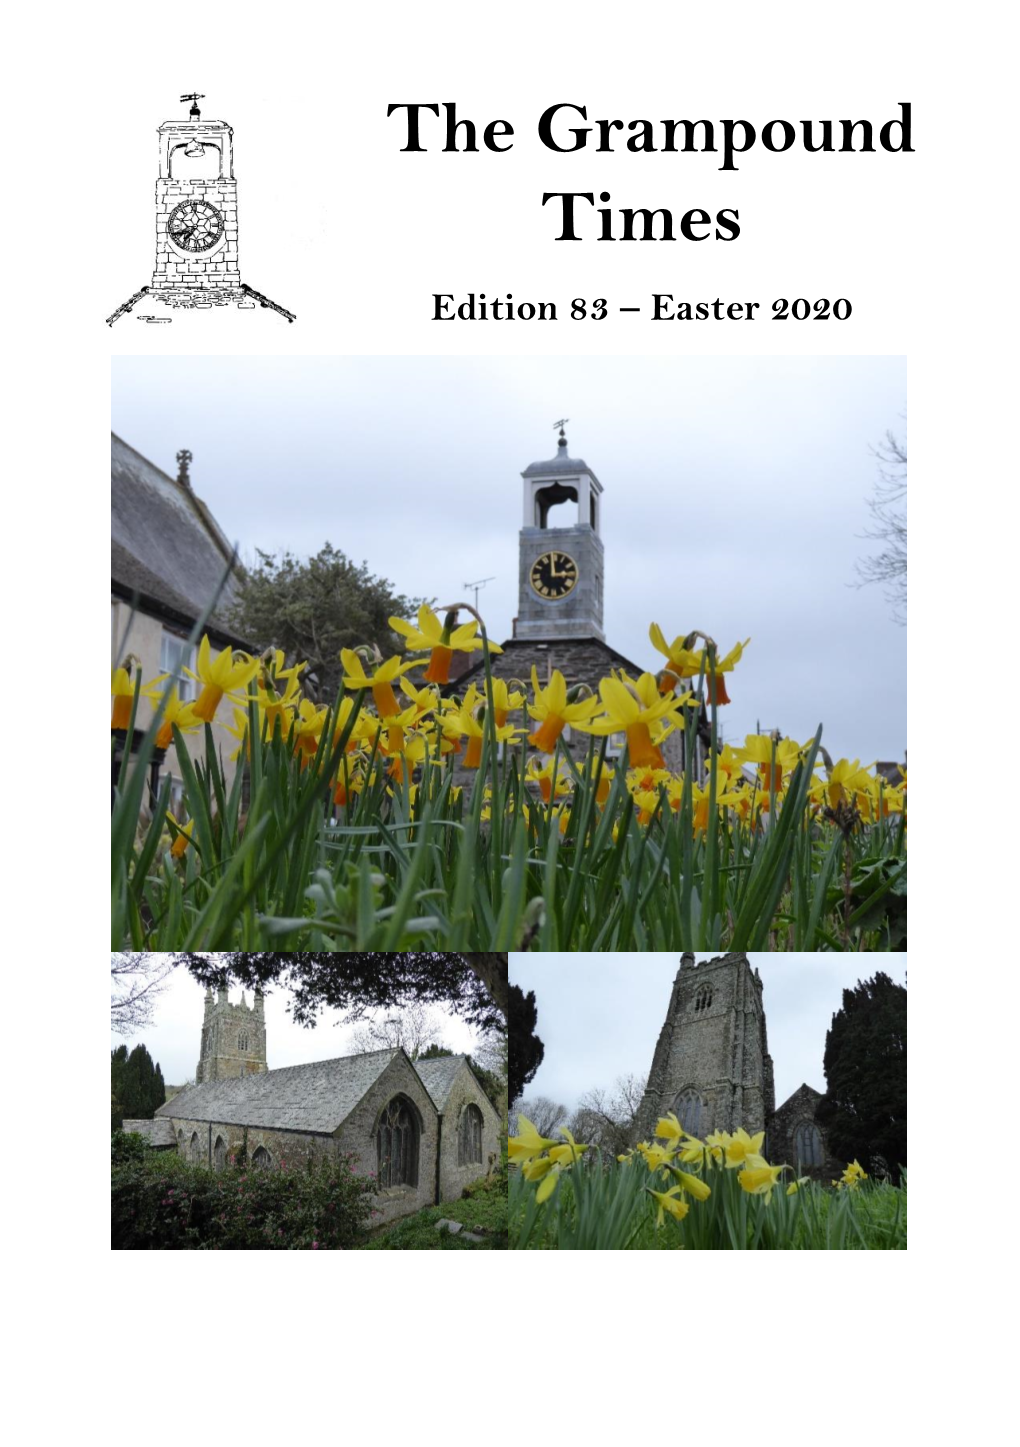 The Grampound Times Edition 83 – Easter 2020